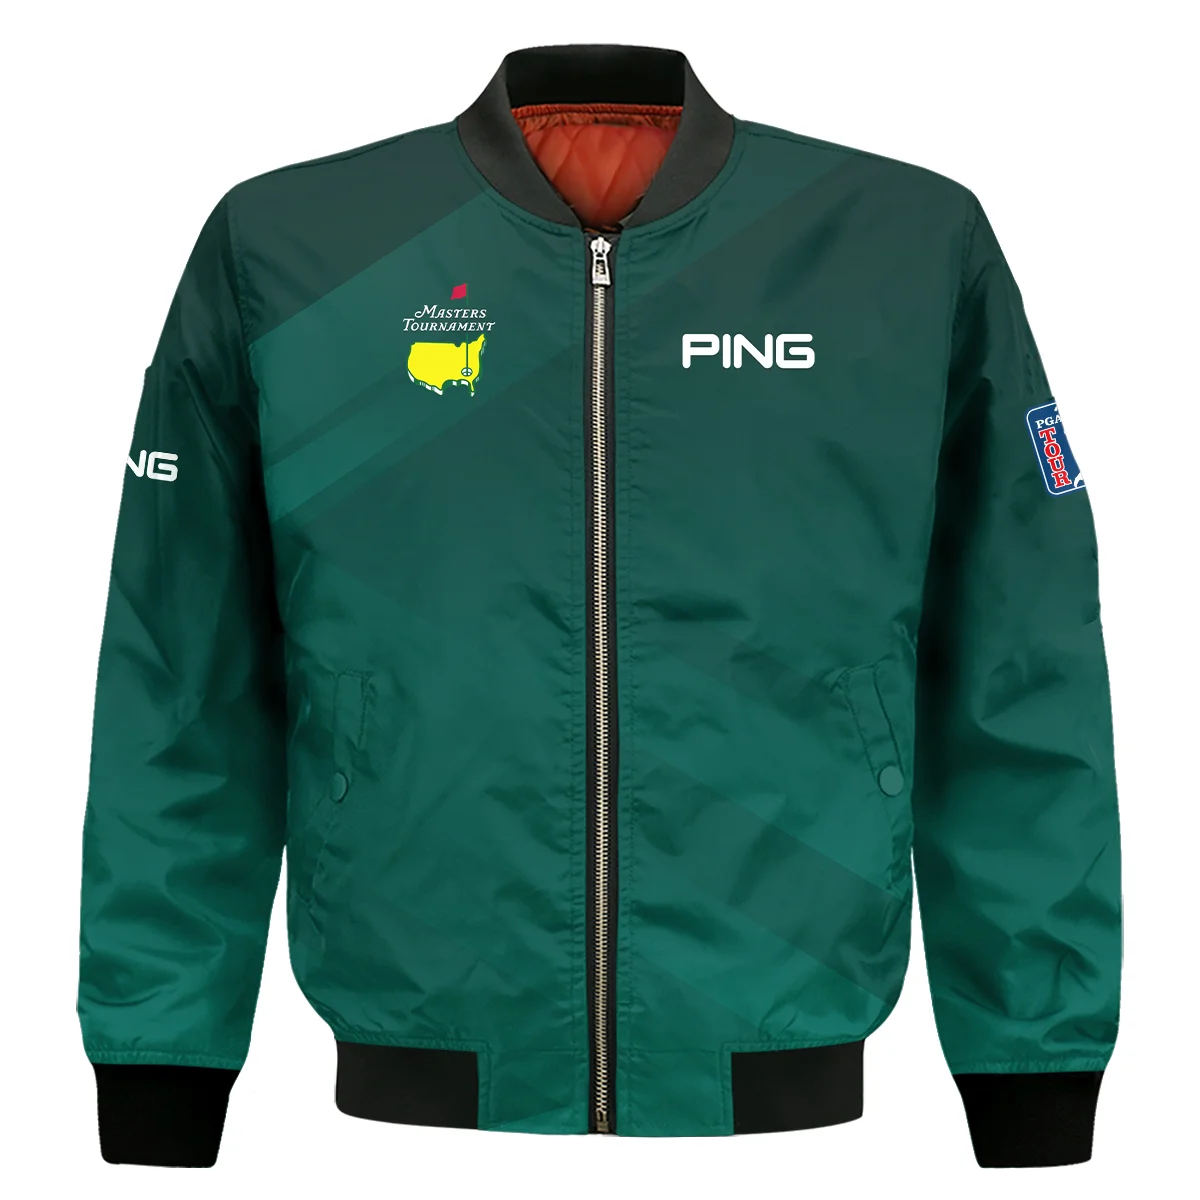 Masters Tournament Dark Green Gradient Golf Sport Ping Bomber Jacket Style Classic Bomber Jacket